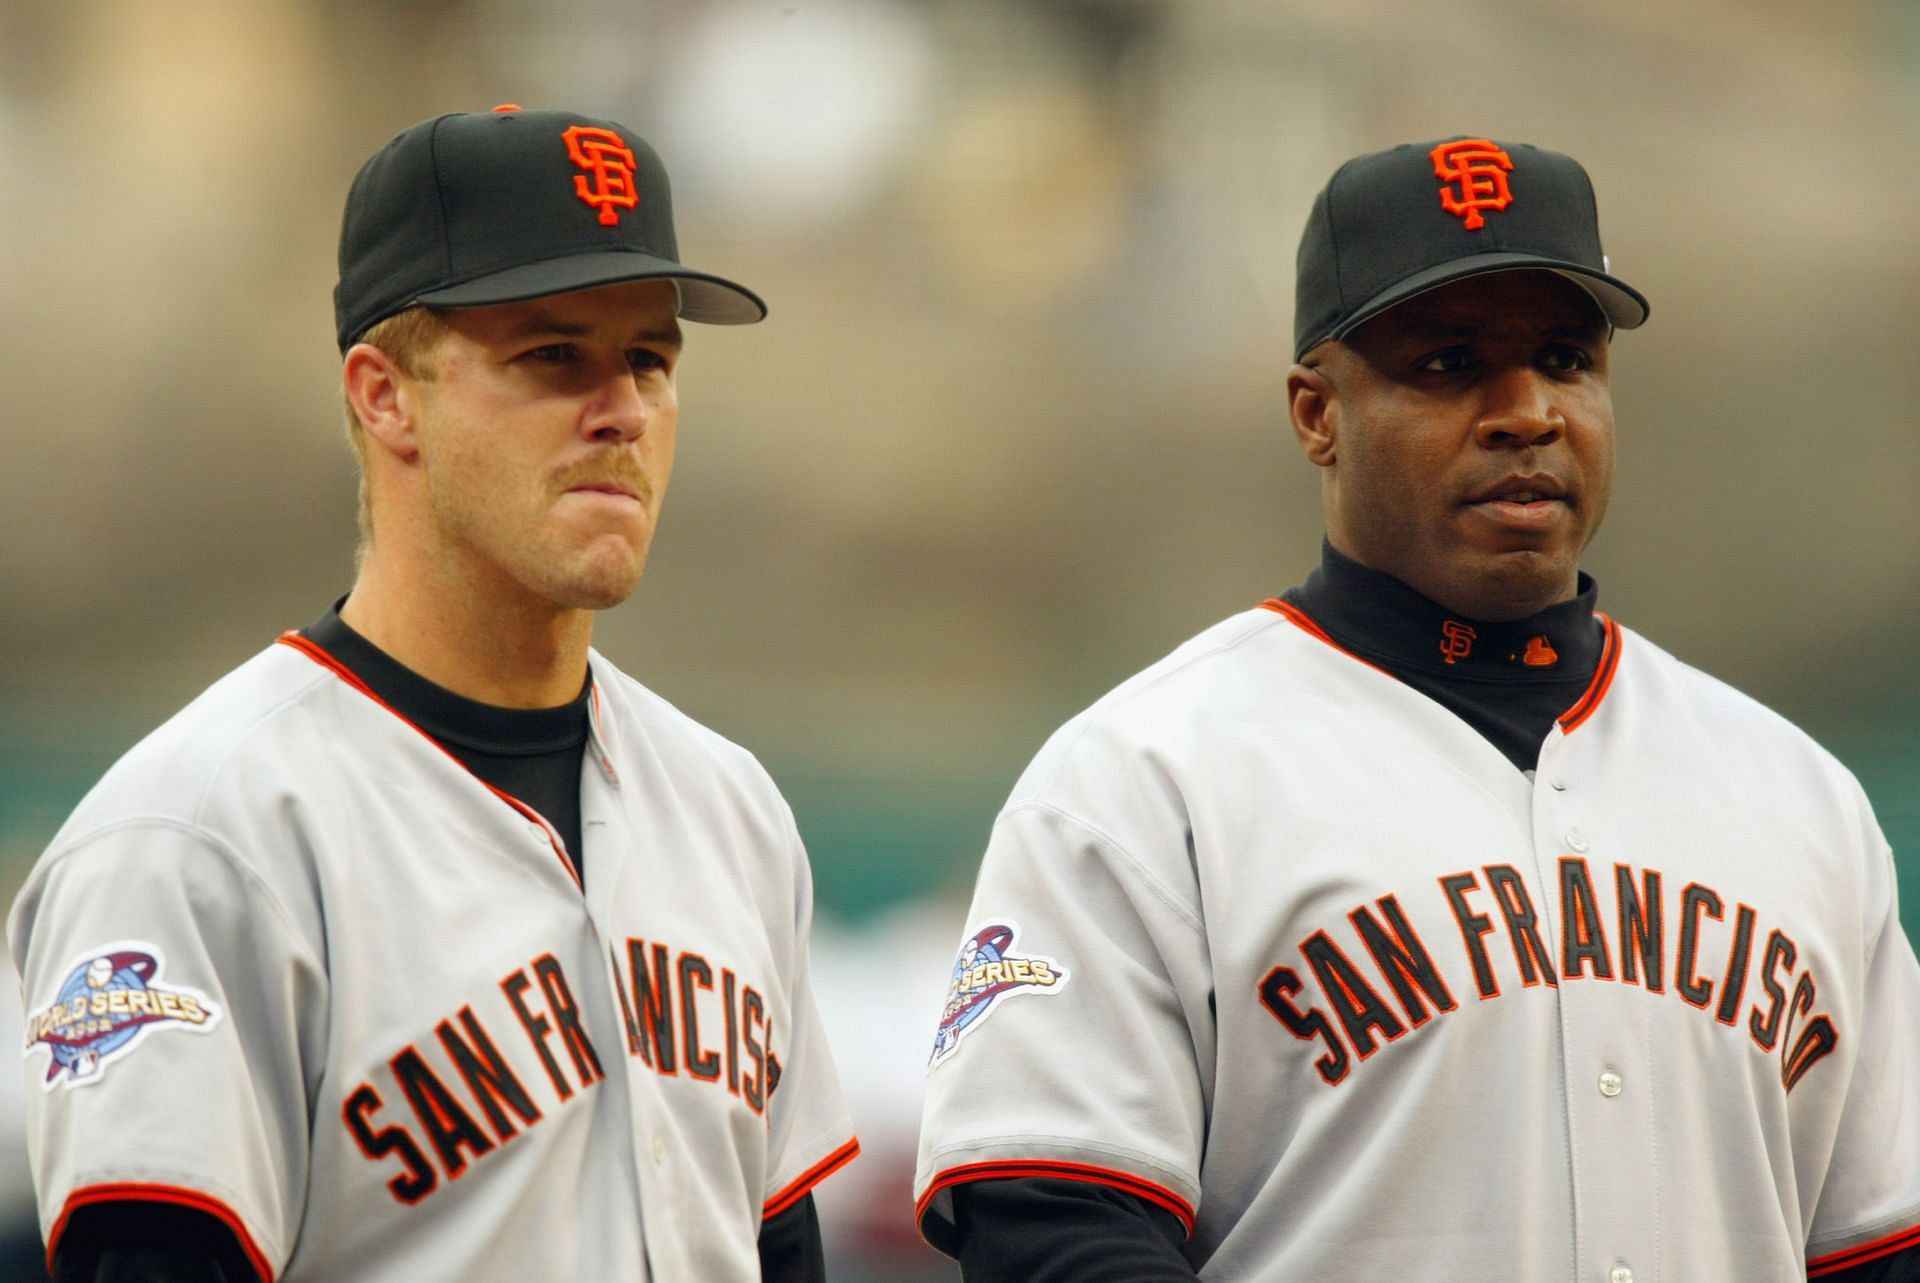 Jeff Kent: When Jeff Kent predicted his tense relationship with